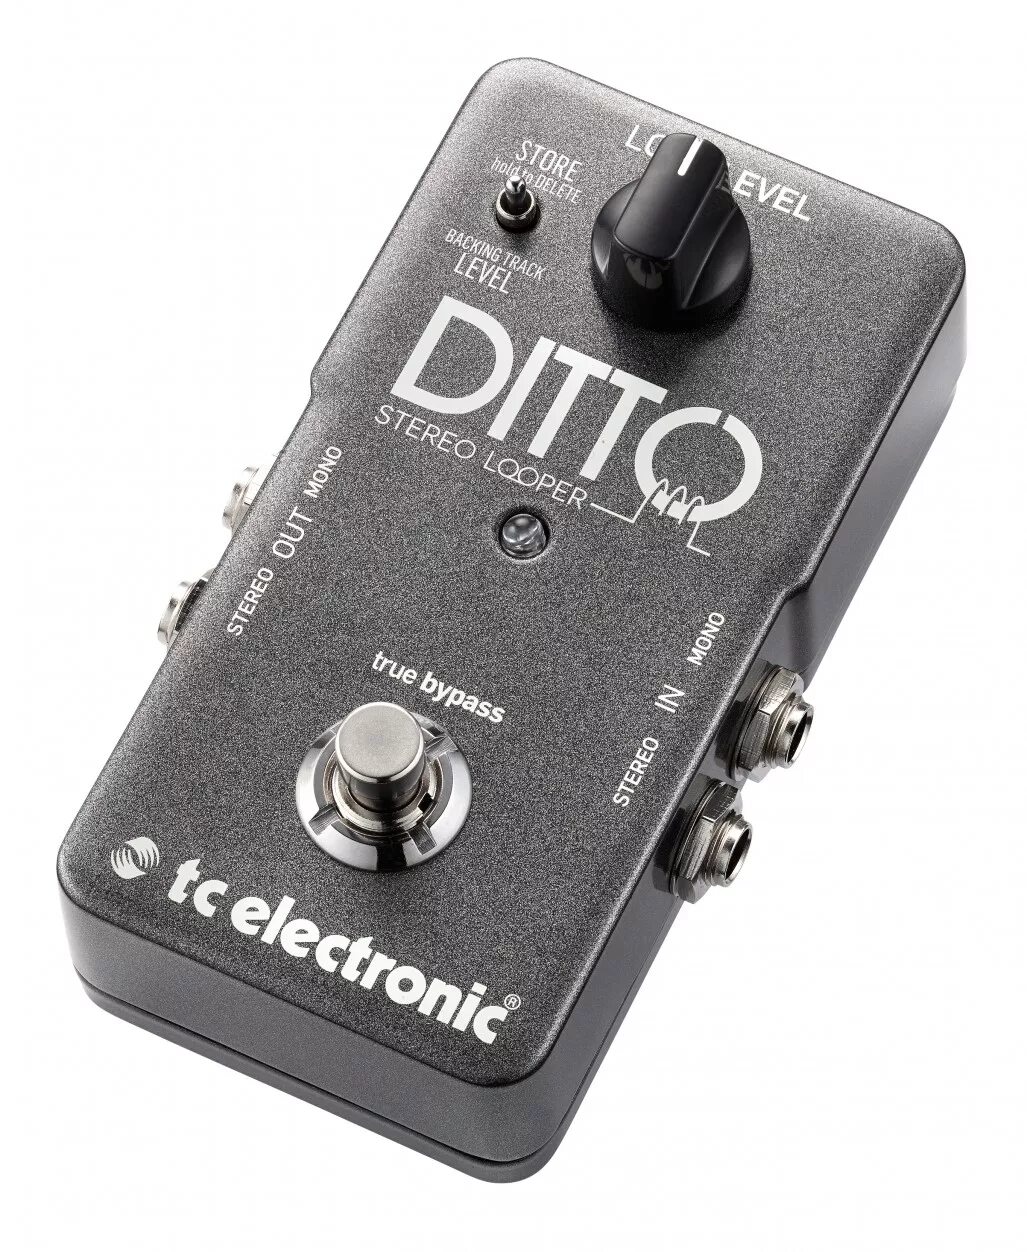 TC Electronic педаль Ditto stereo Looper. TC Electronic Ditto x2 Looper. Looper для гитары. TC Electronic Ditto x4 Looper купить.